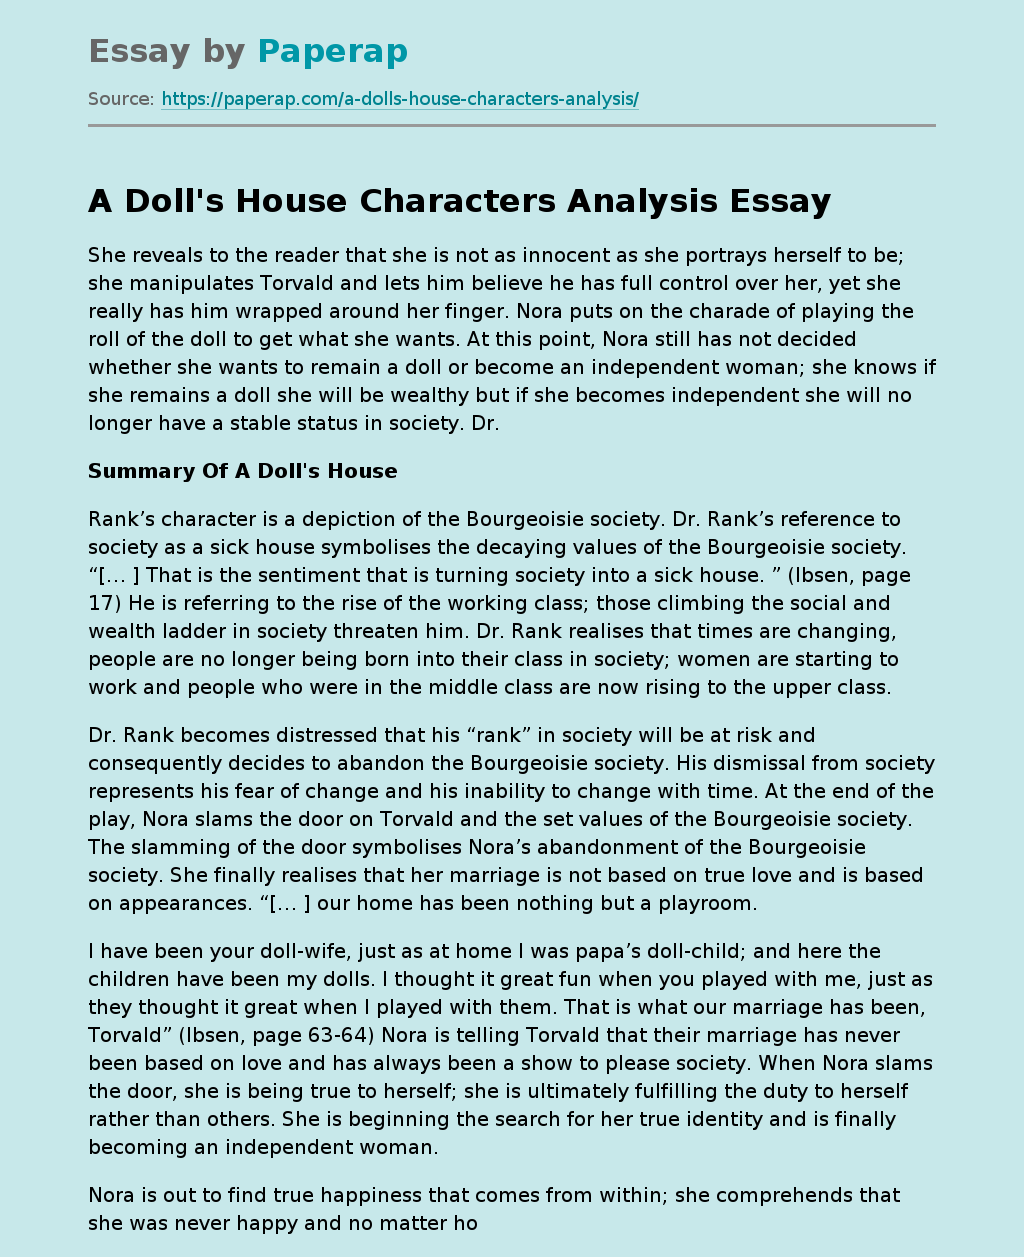 A Doll's House Characters Analysis